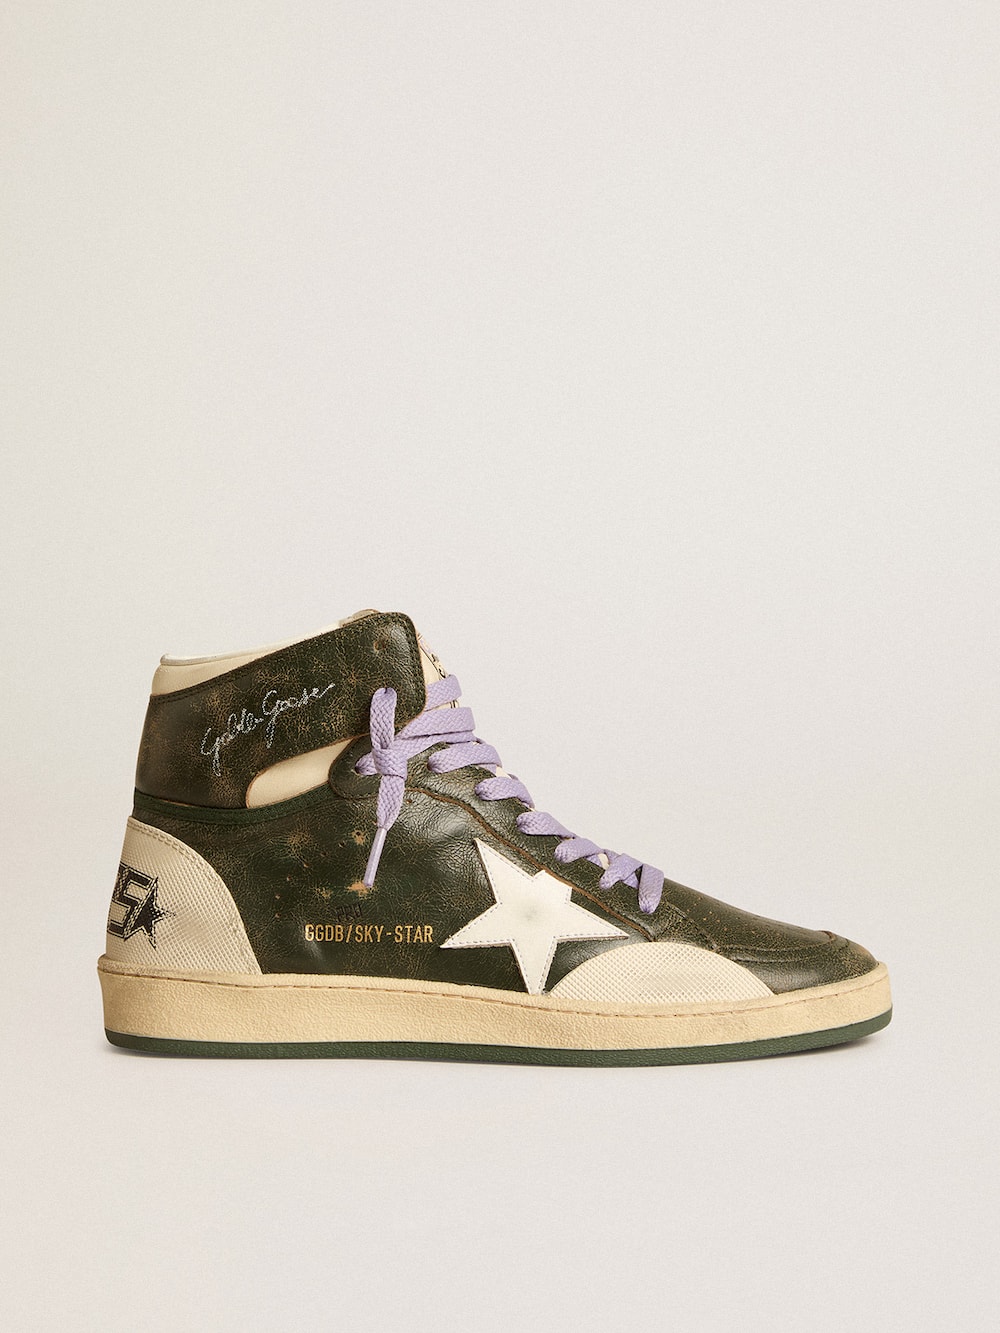 Golden Goose - Women's Sky-Star Pro in green leather with white star in 